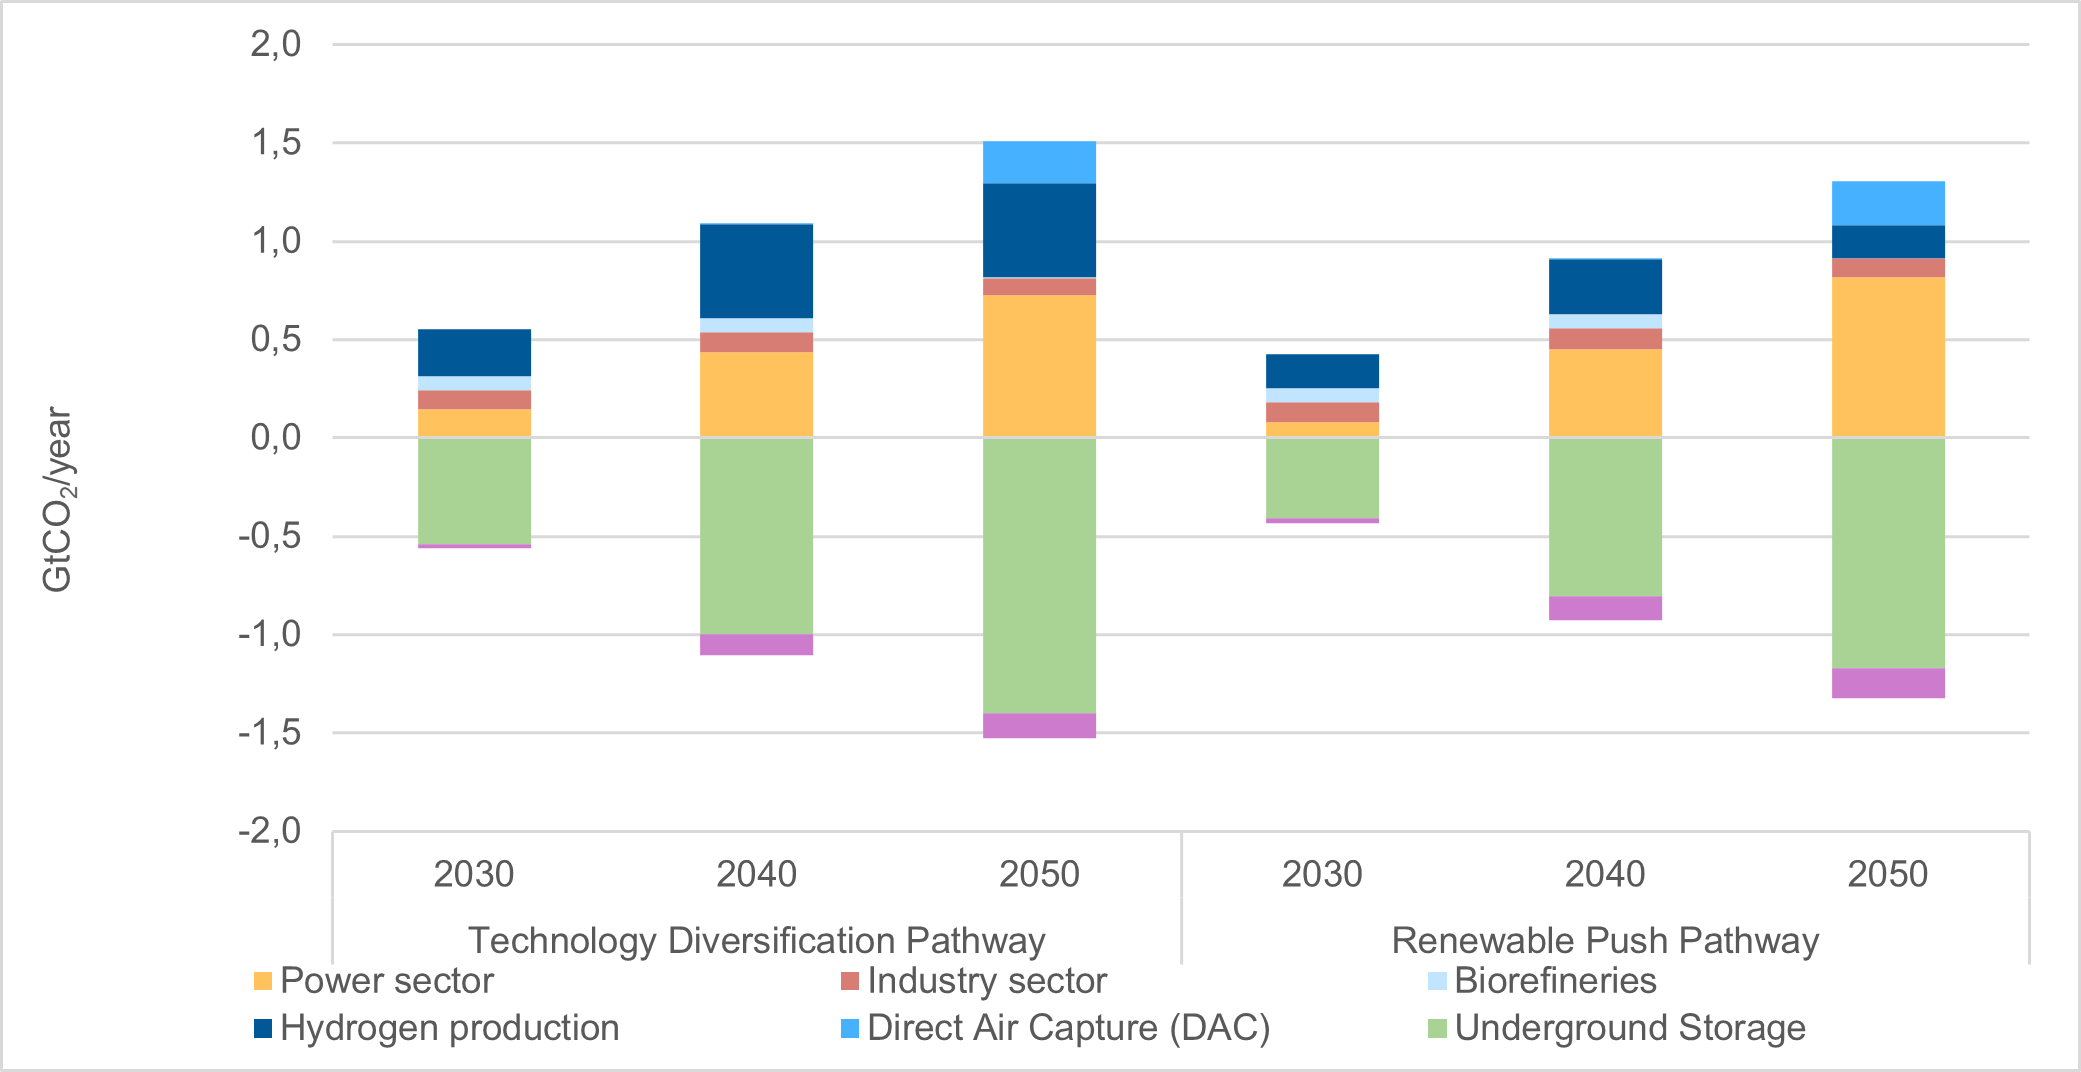 Evolution of CO2 capture (in positive), use and storage (in negative) in the Technology Diversification and Renewable Push Pathways, 2030 to 2050.